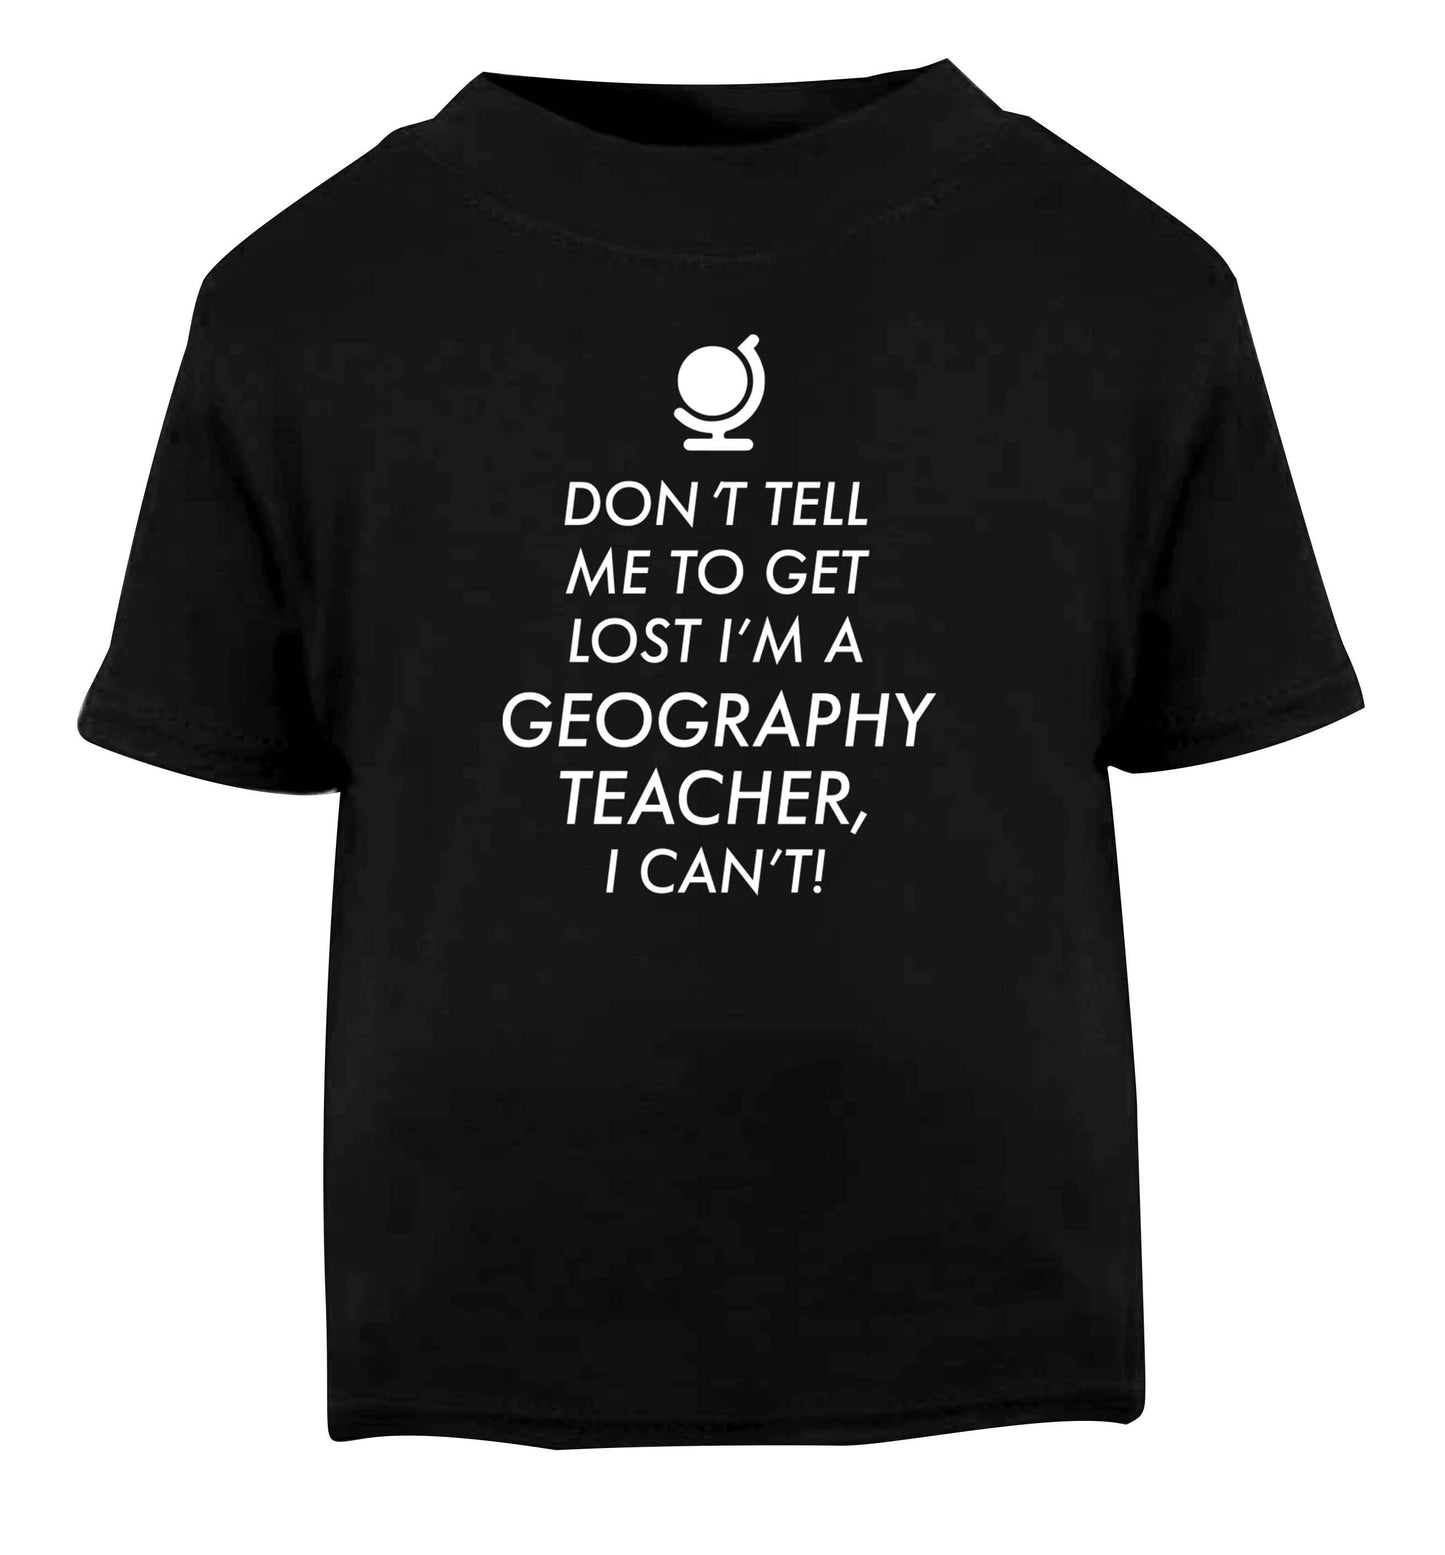 Don't tell me to get lost I'm a geography teacher, I can't Black Baby Toddler Tshirt 2 years